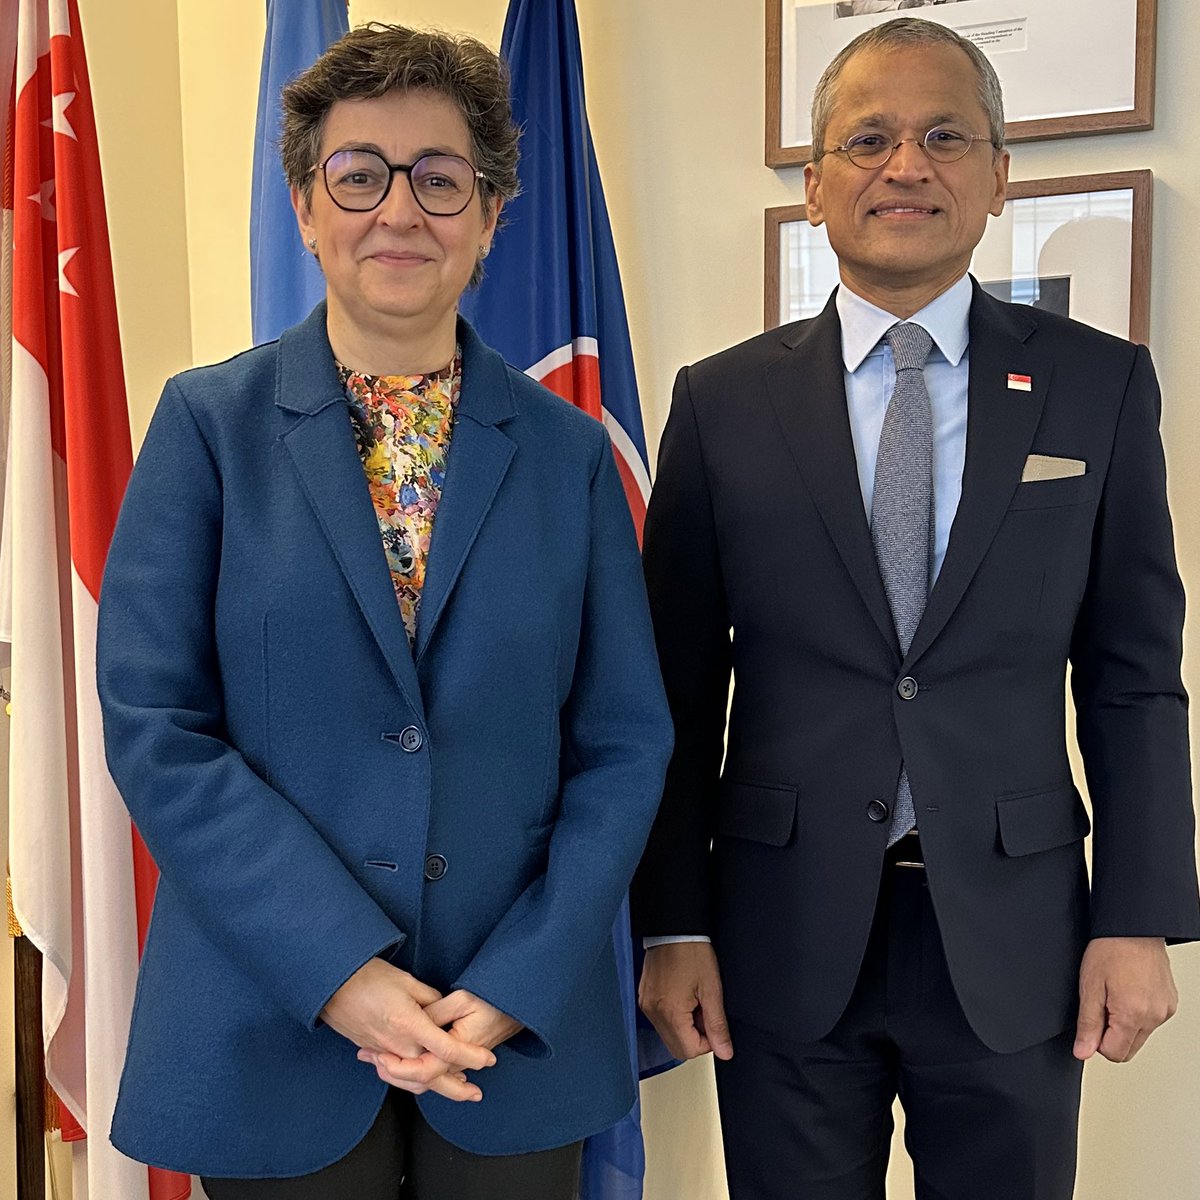 Always a pleasure to meet my good friend @AranchaGlezLaya; we had a tour d’horizon discussion. She is one of the sharpest observers of international issues and I benefited greatly from her views.